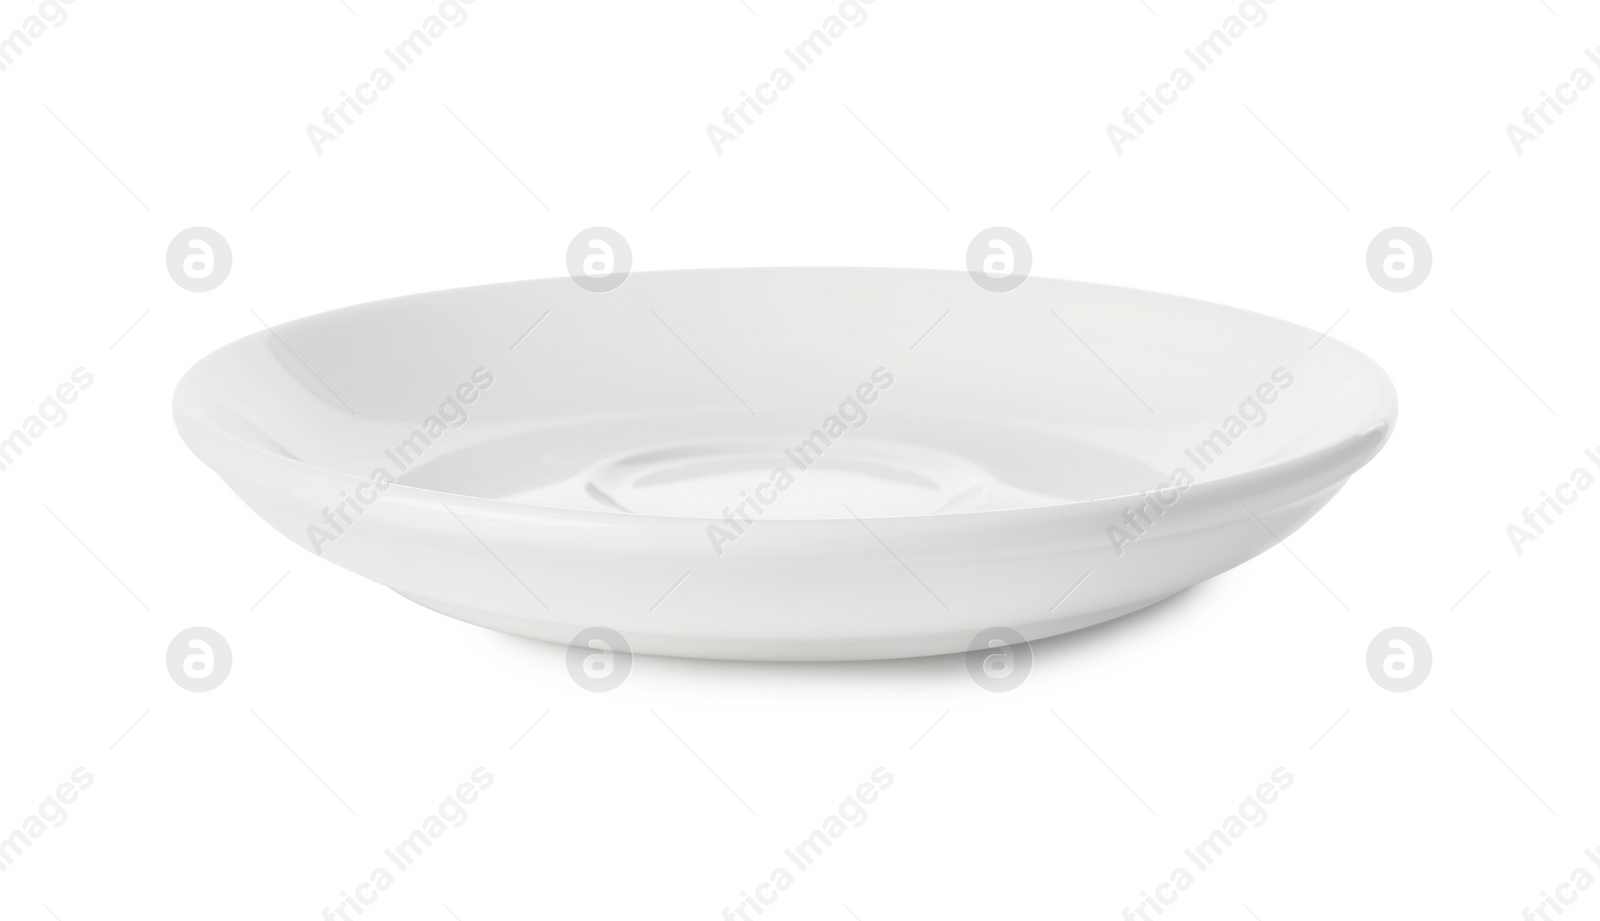 Photo of One clean ceramic saucer isolated on white